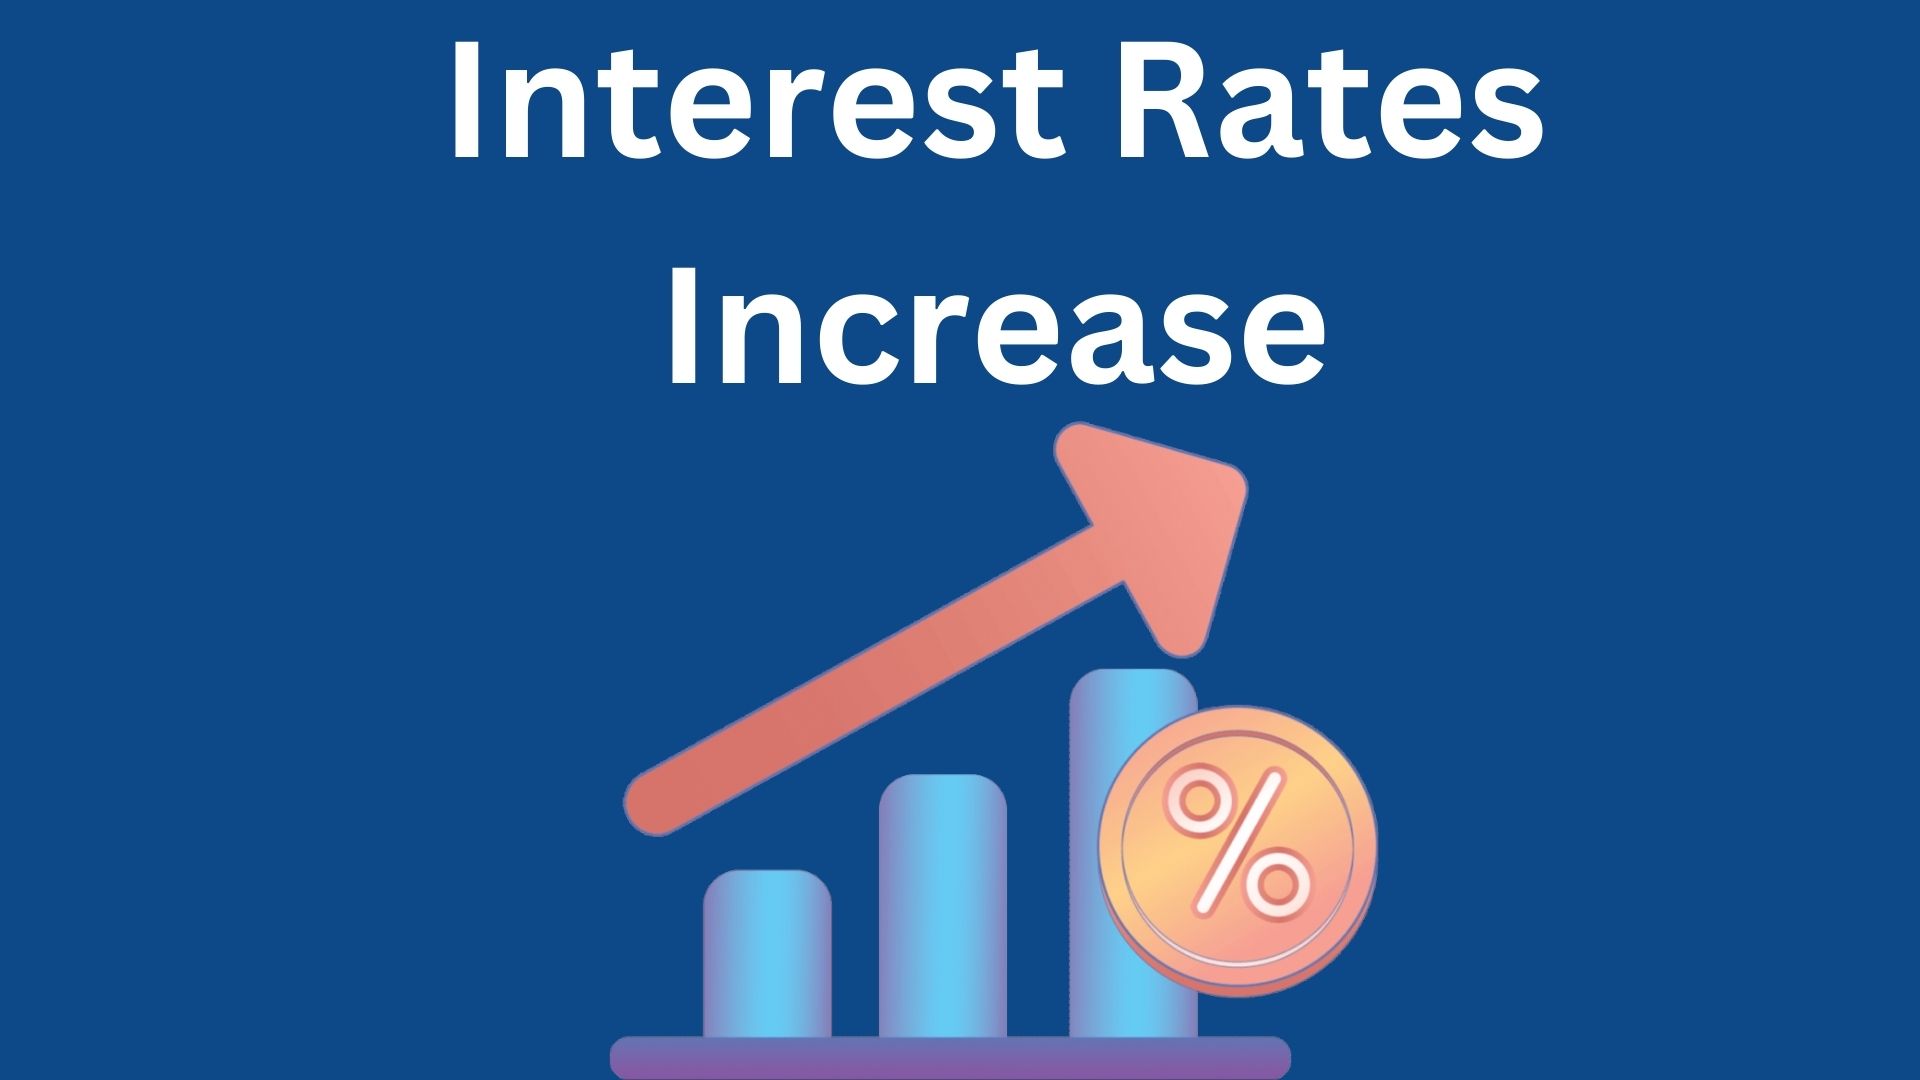 New Equity Bank Mortgage and Overdraft Loan Interest Rates